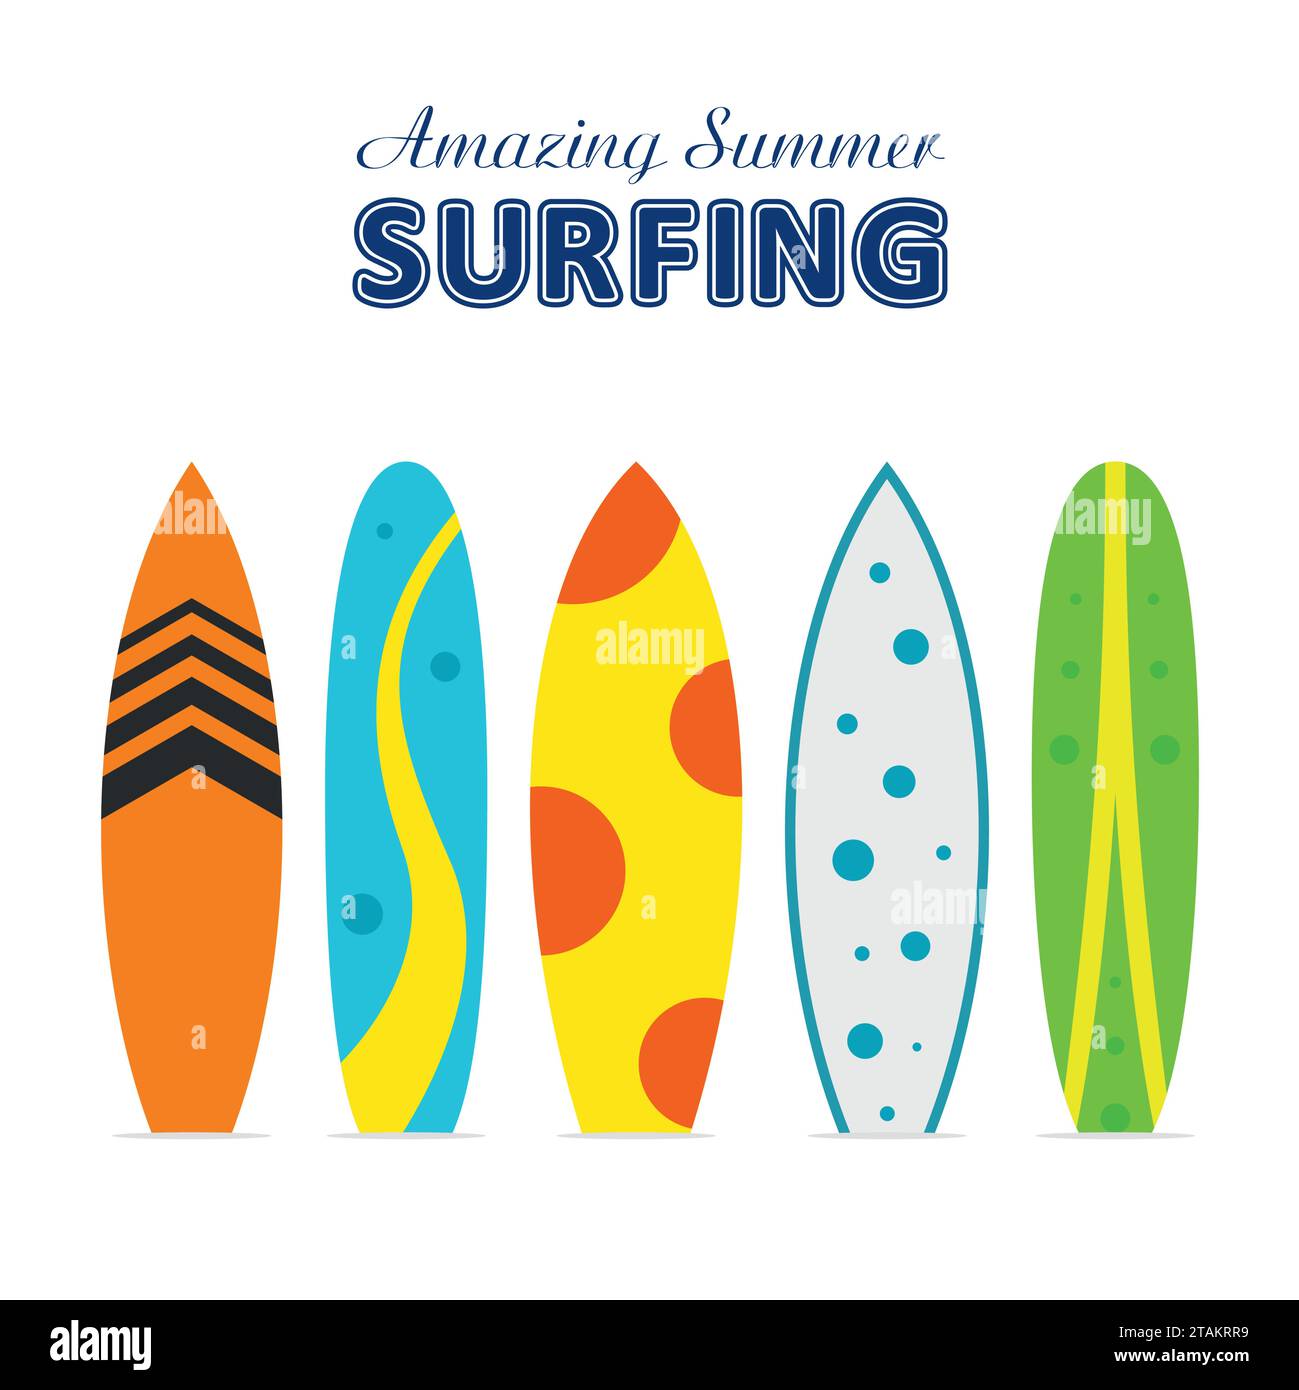 Surfing designs Stock Vector Images - Alamy